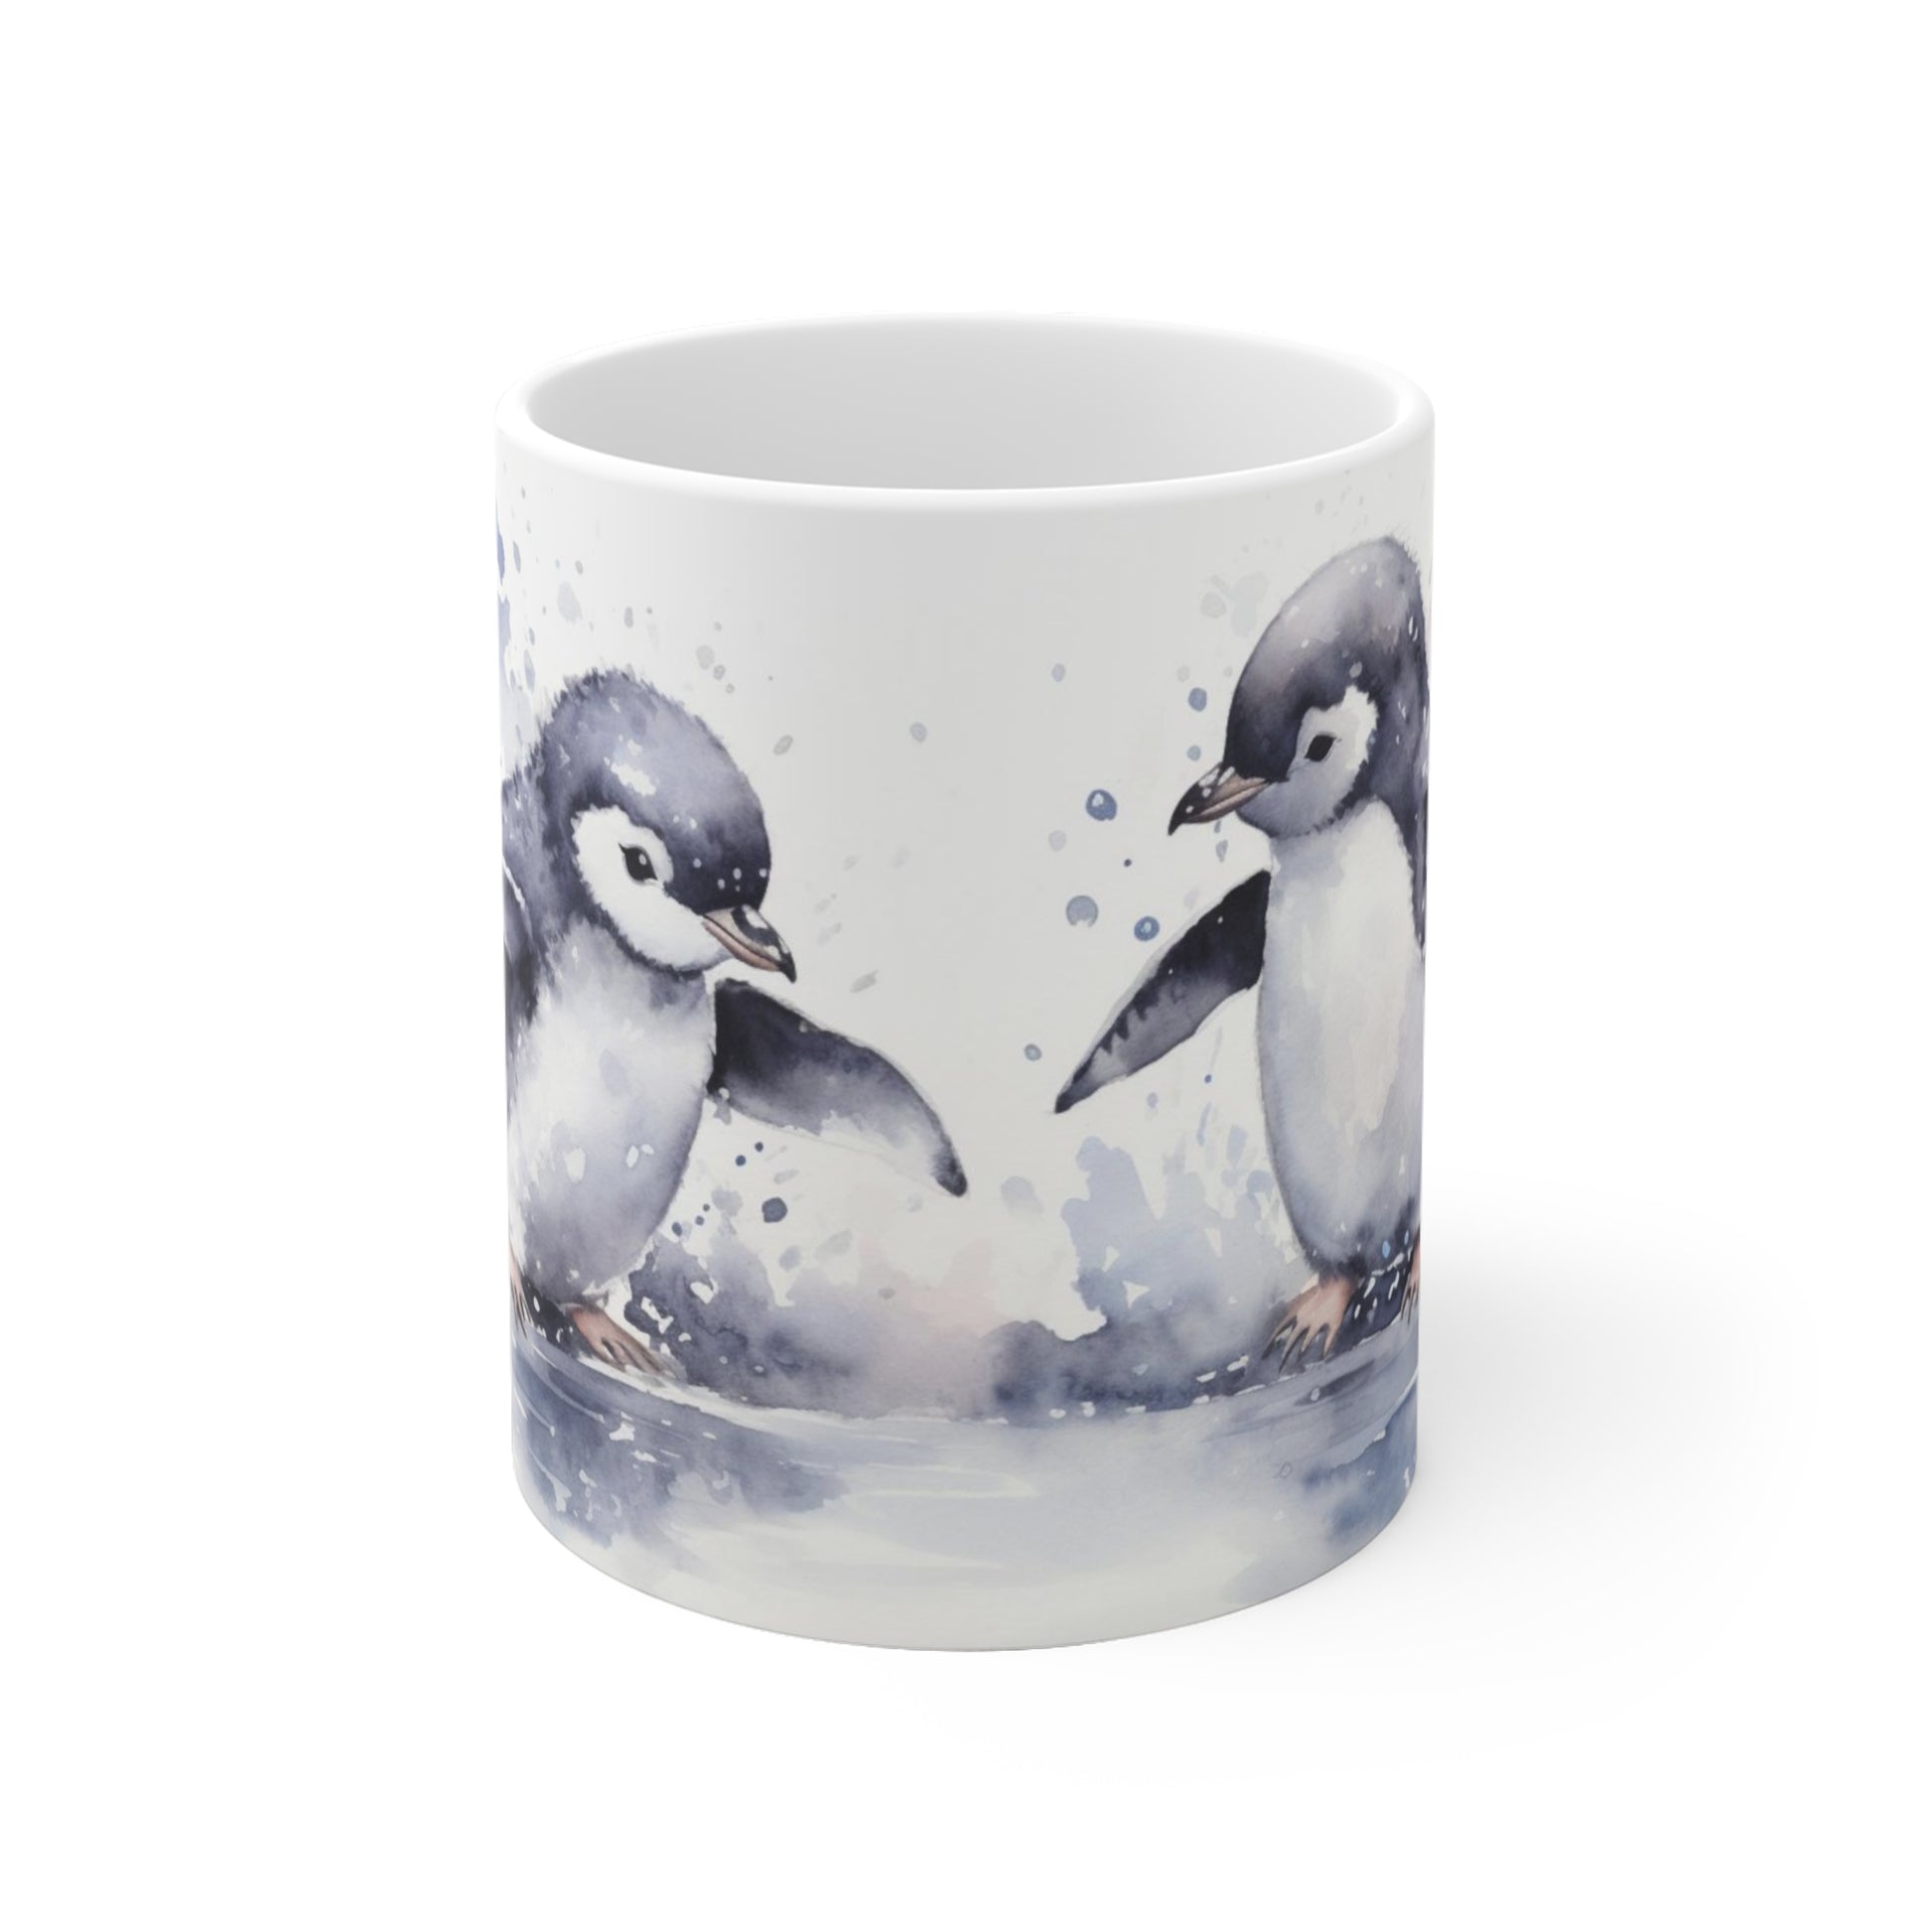 Two Cute Penguins Coffee Mug, Watercolor Ceramic Cup Tea Chocolate Lover Unique Microwave Safe Novelty Cool Gift Starcove Fashion